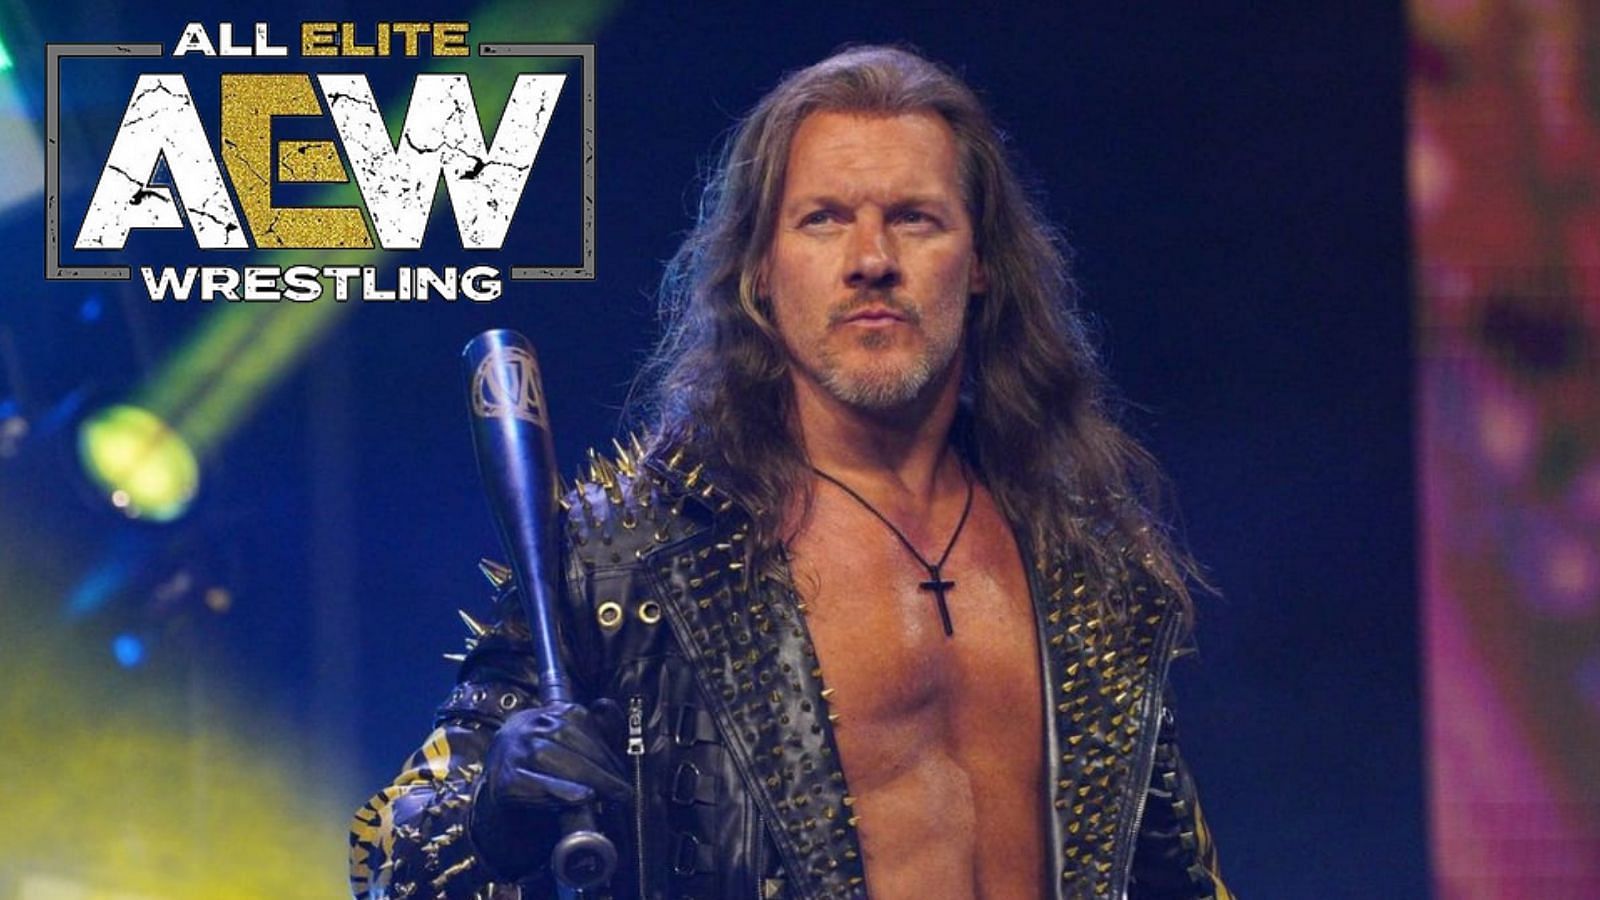 Just how much sway does the former World Champion have in AEW?